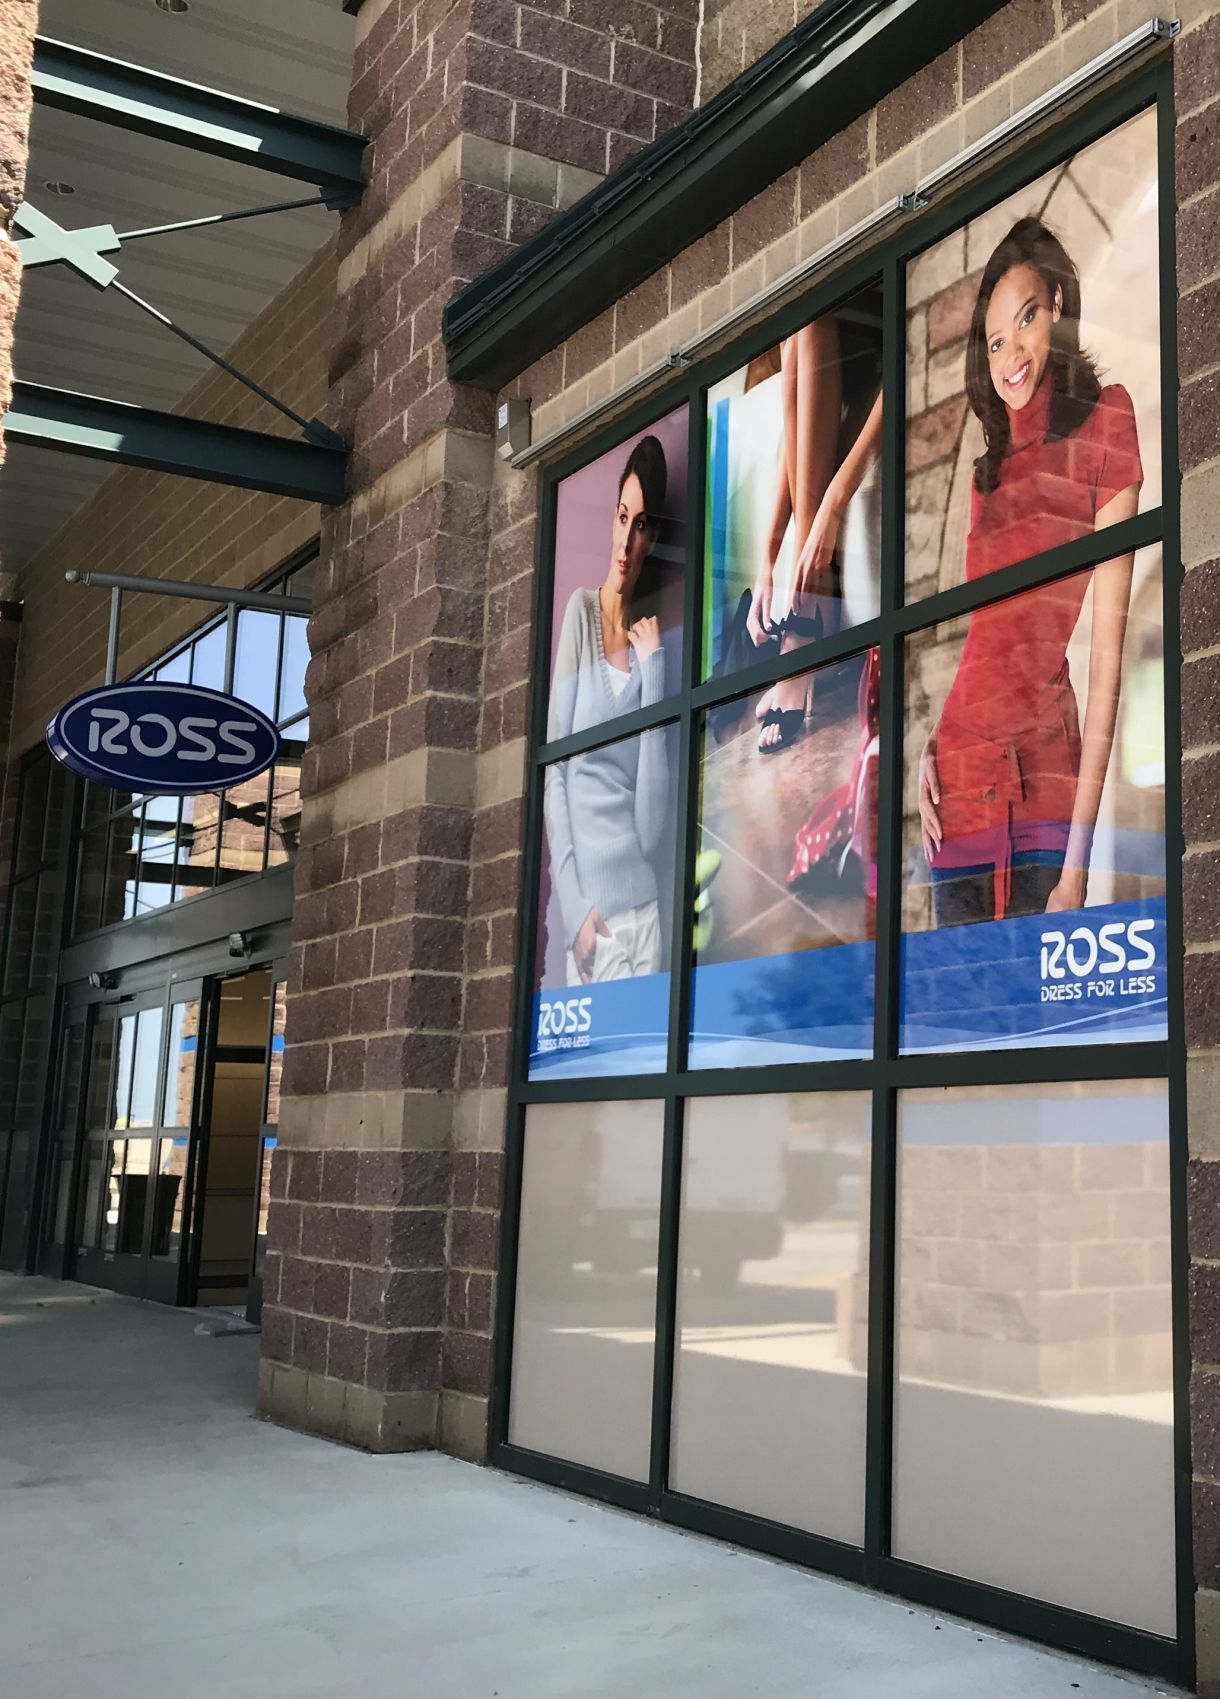 Ross Dress for Less opening in October 